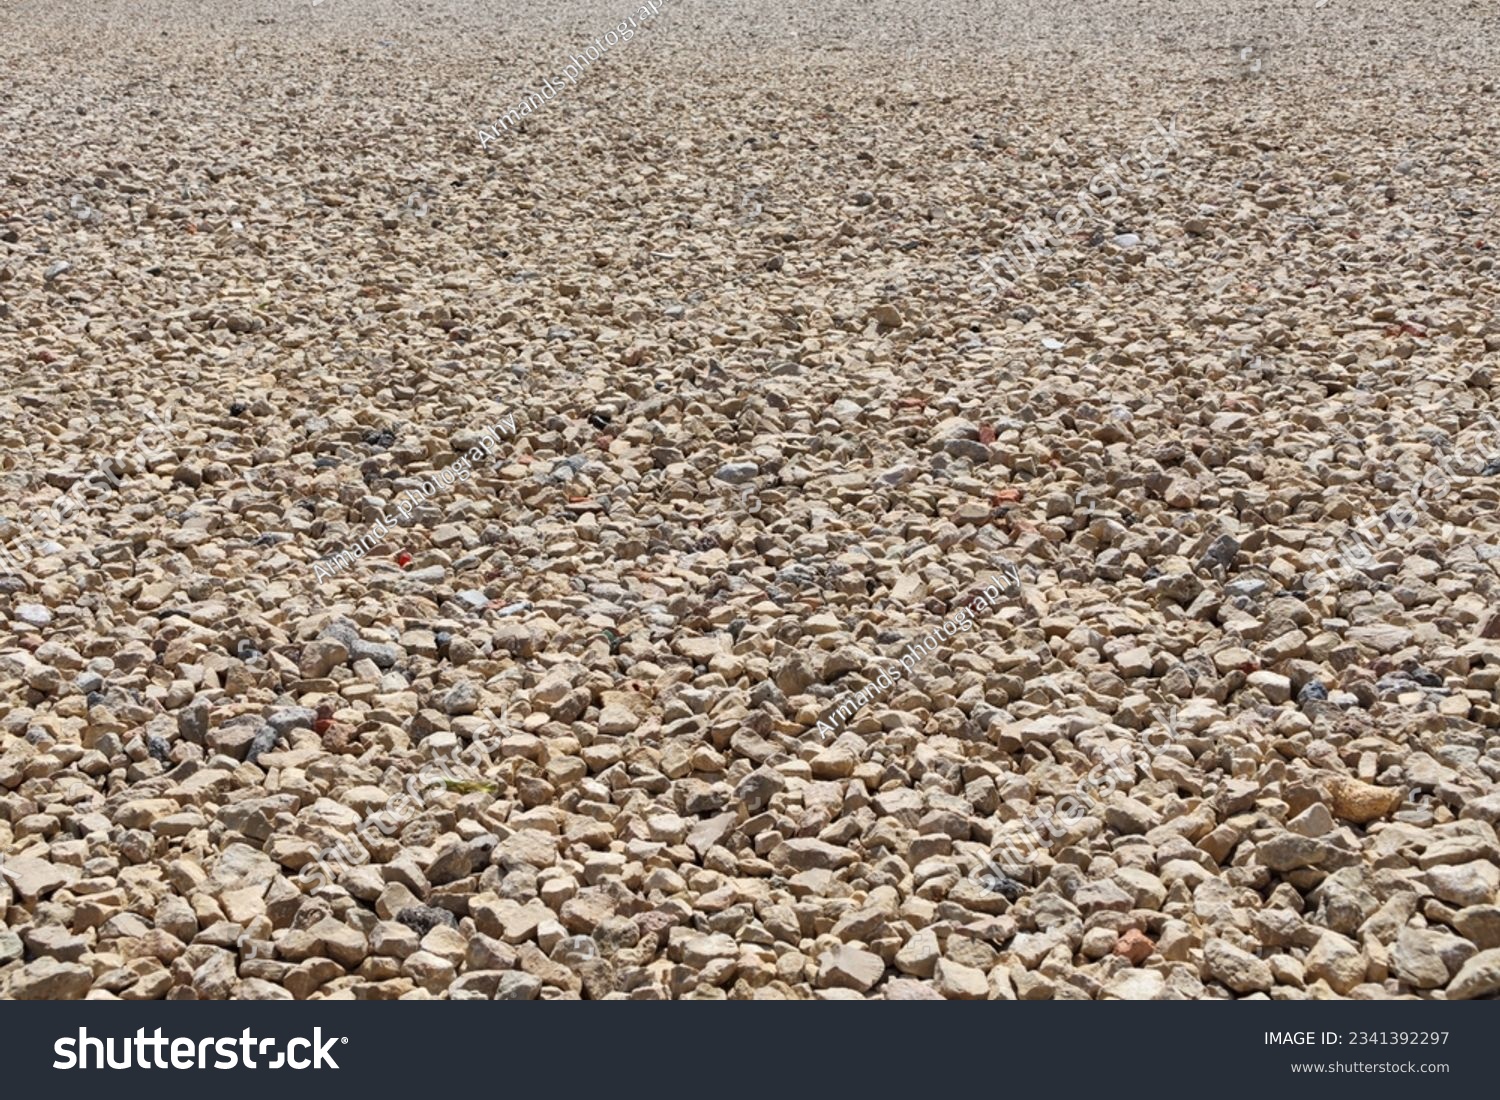 Background of crushed stones in perspective. Granite stones, small stone chips, building material rock, gravel texture. #2341392297